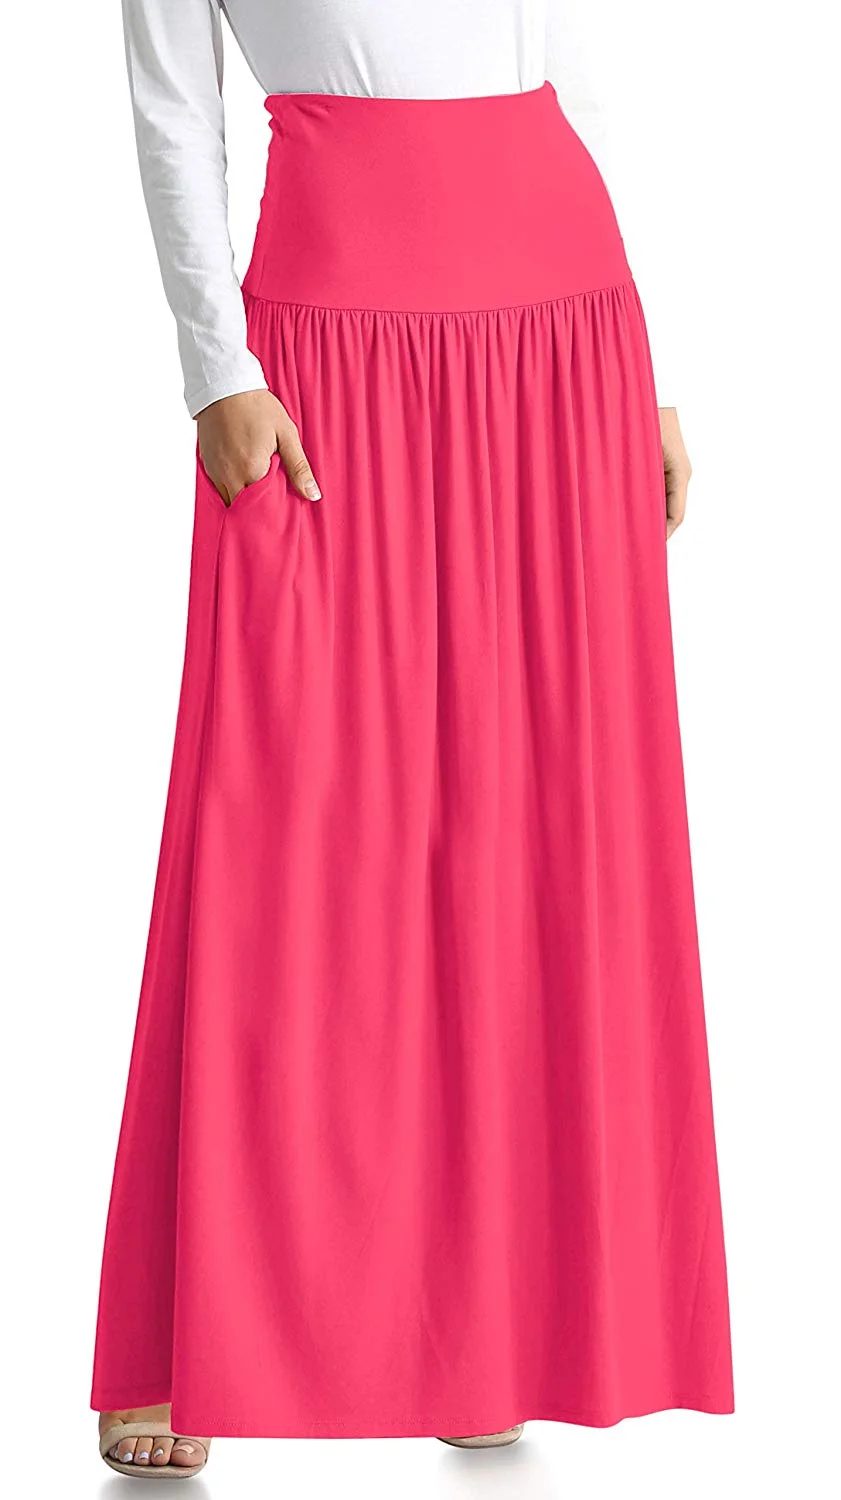 Maxi Skirt Womens Long Maxi Skirt with Pockets Reg and Plus Size